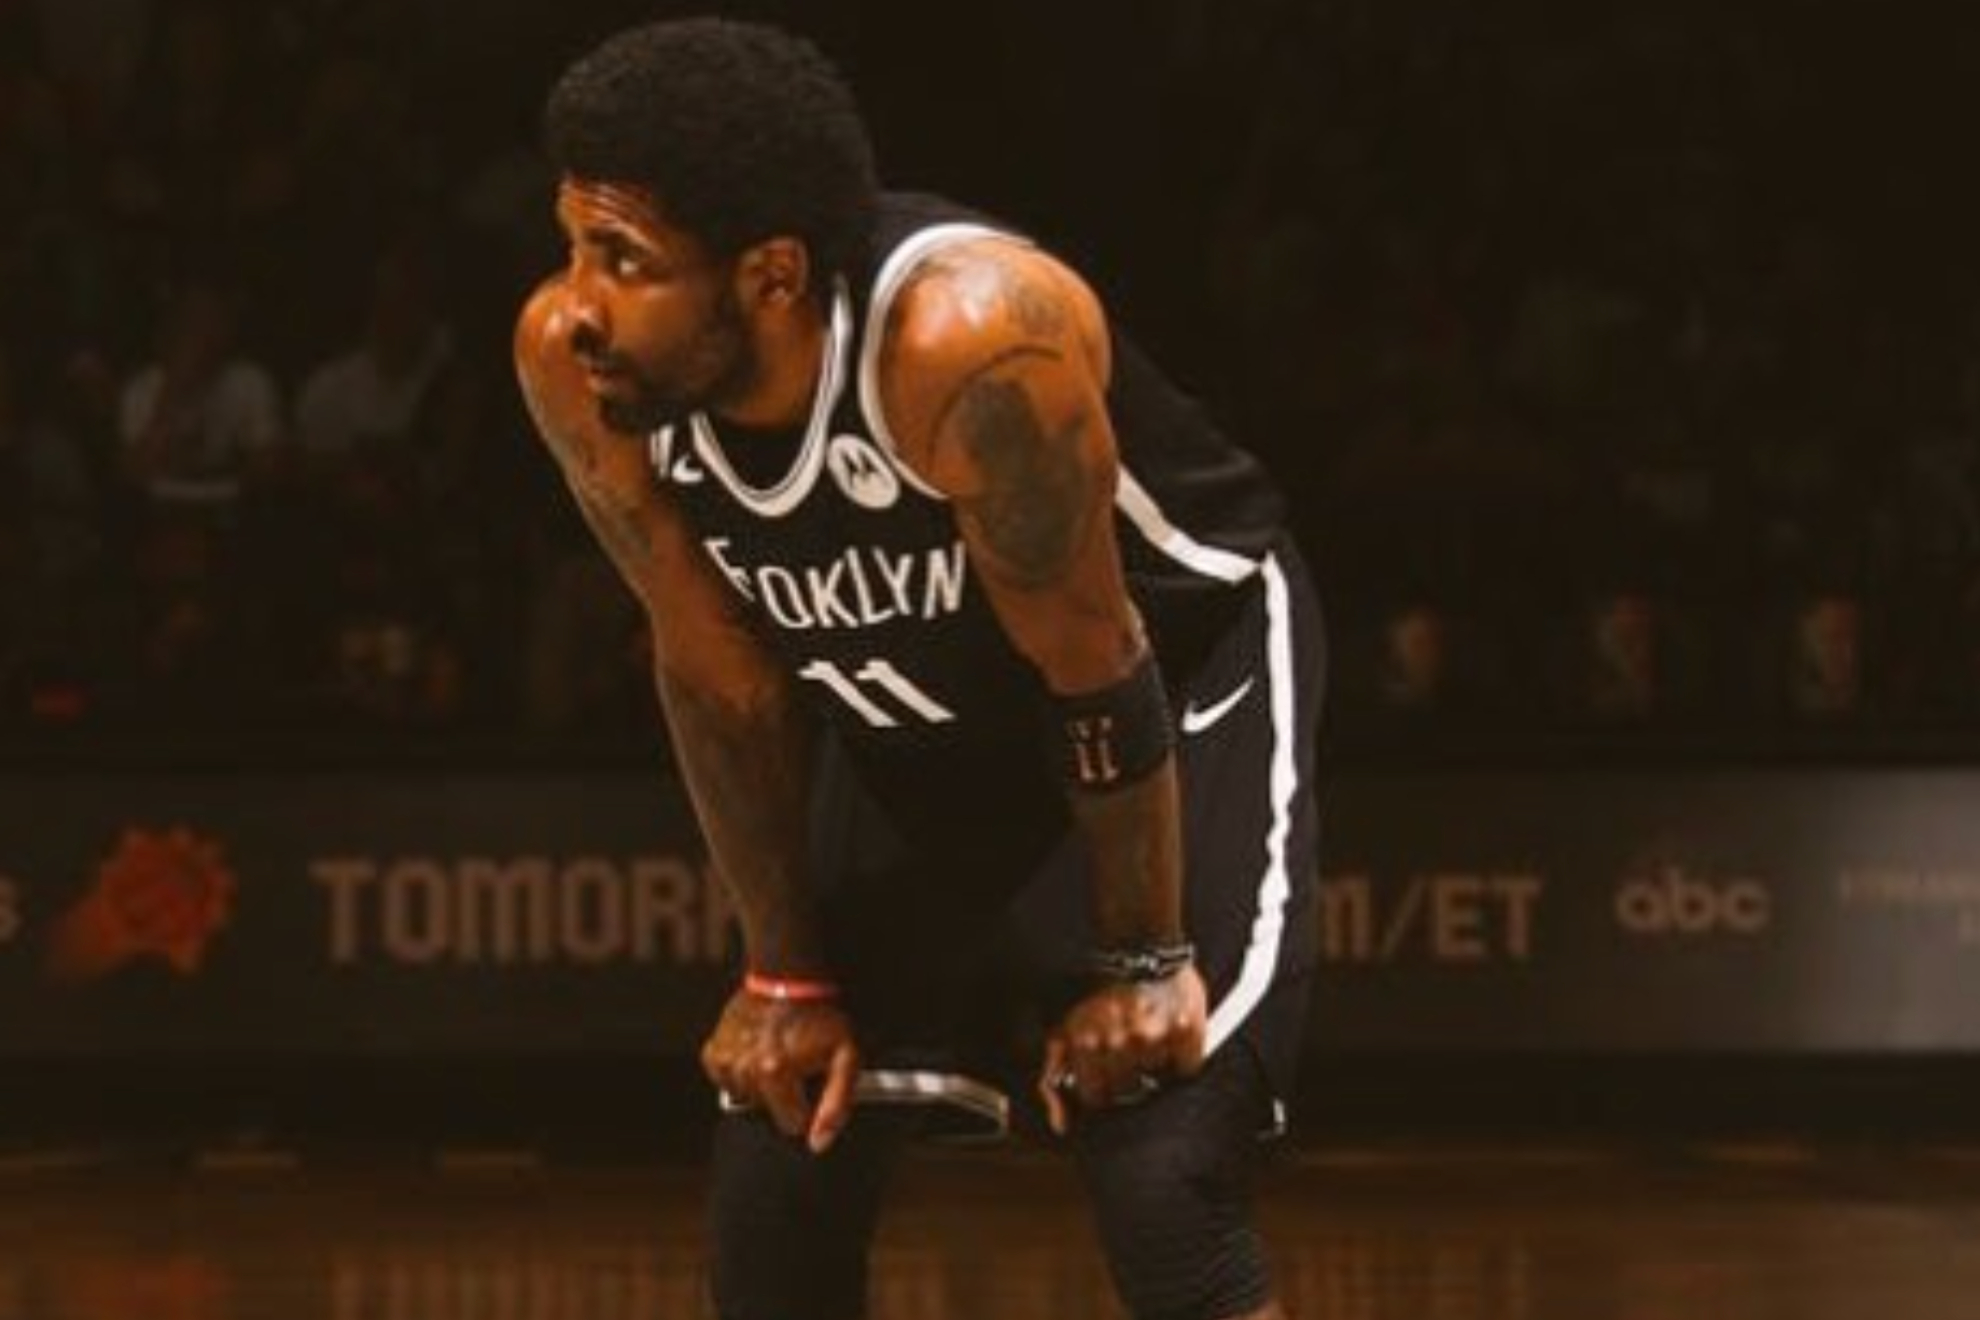 Kyrie Irving playing for the Brooklyn Nets